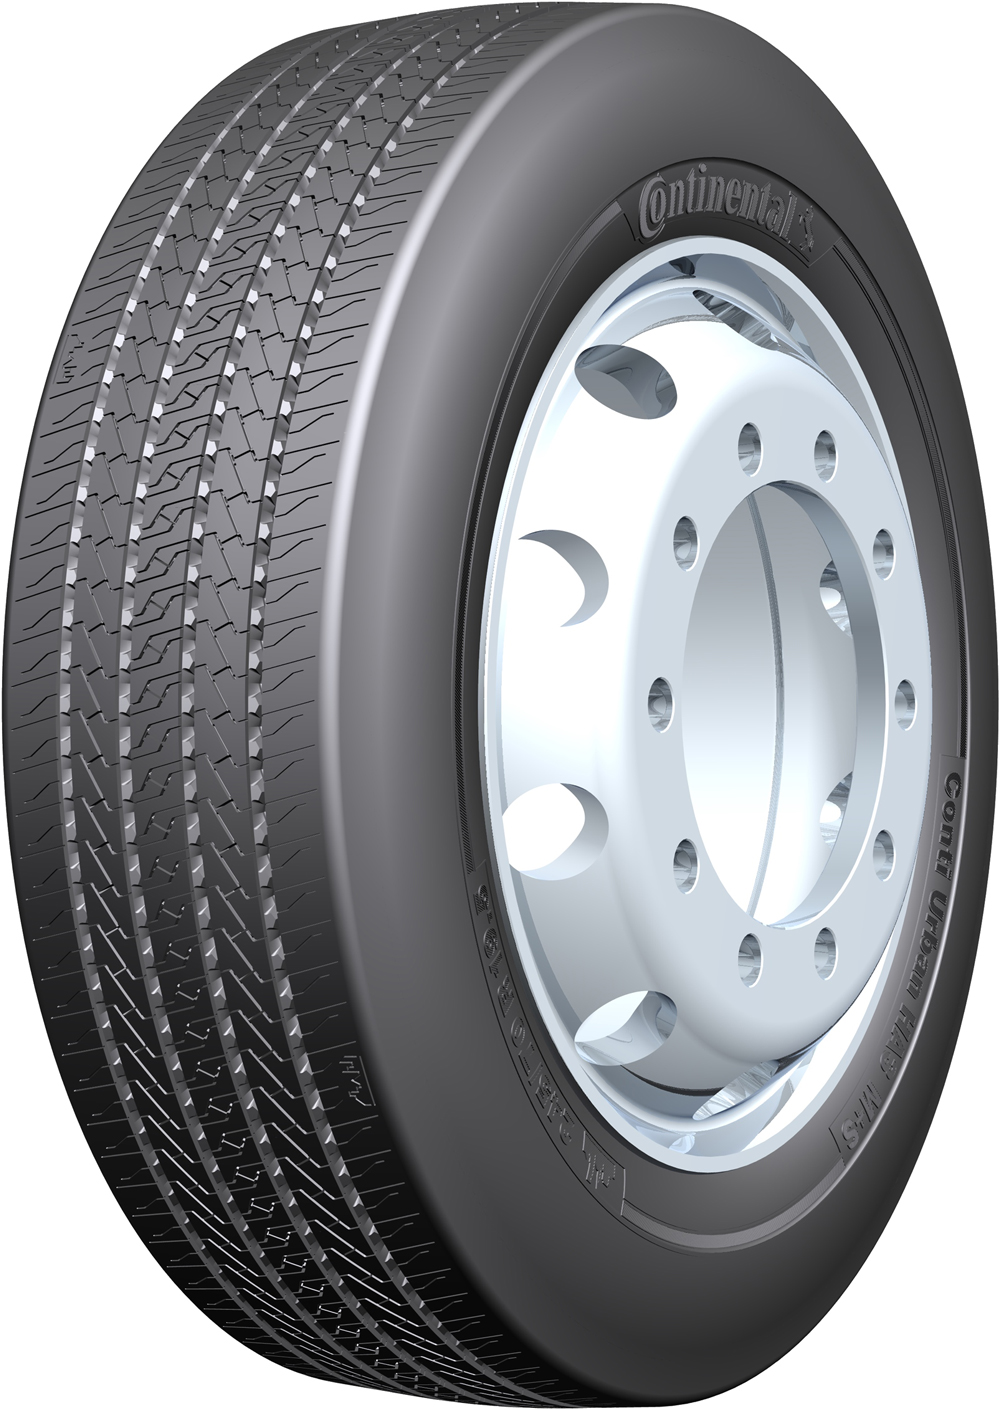 product_type-heavy_tires CONTINENTAL HA3 URBAN 265/70 R19.5 140M